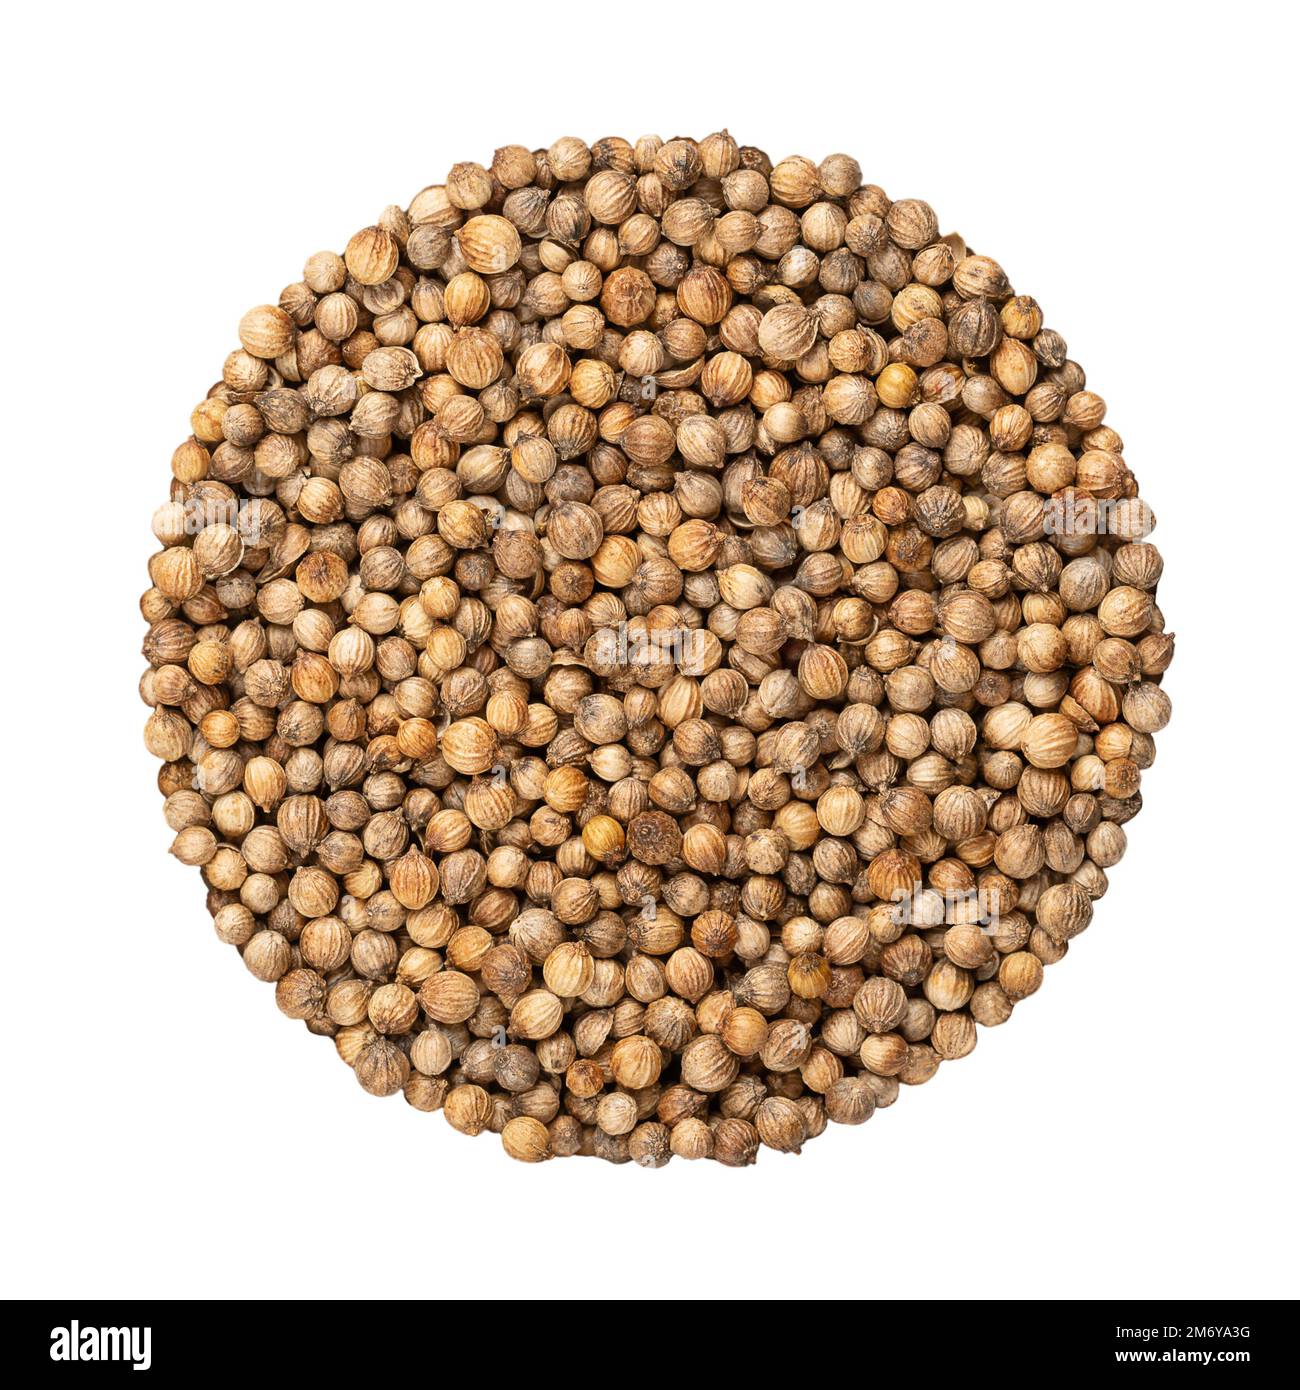 Coriander seeds, circle, close-up, isolated, from above. Disk made of whole dried fruits of Coriandrum sativum also known as Chinese parsley, a spice. Stock Photo